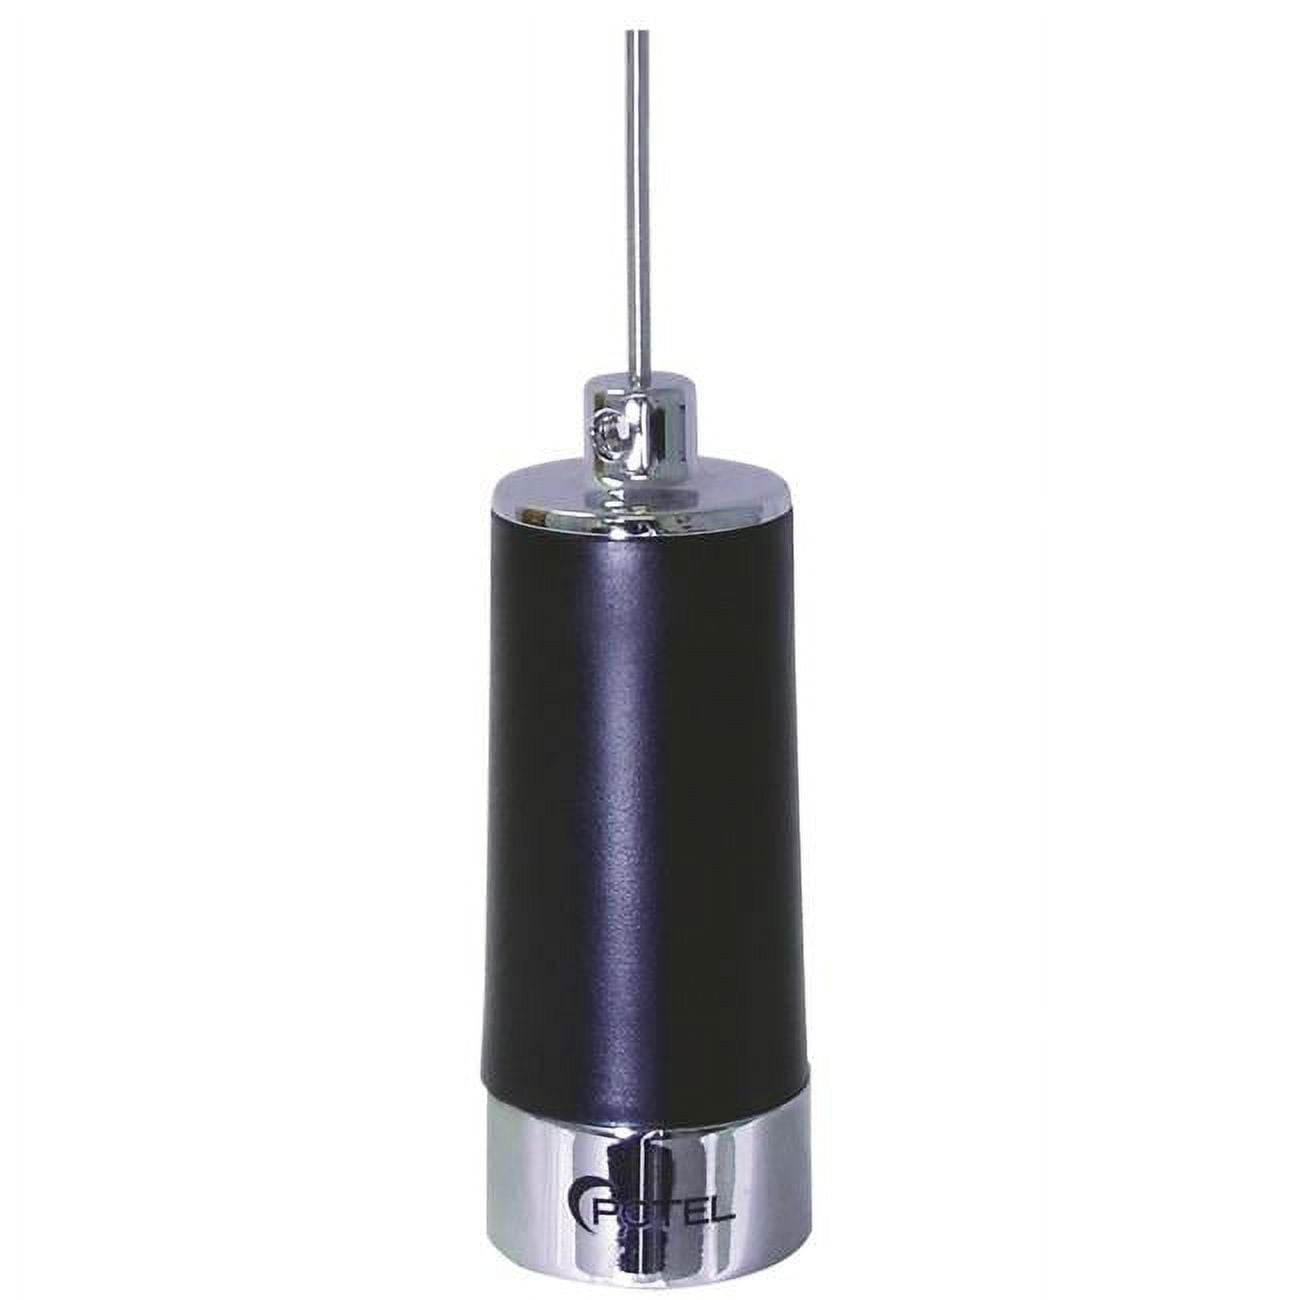 Picture of PCTEL & Maxrad MLBDC3700 37-40 MHz 500W Base Load 1 by 4 Wave DC Grounded Antenna - Coil & Whip